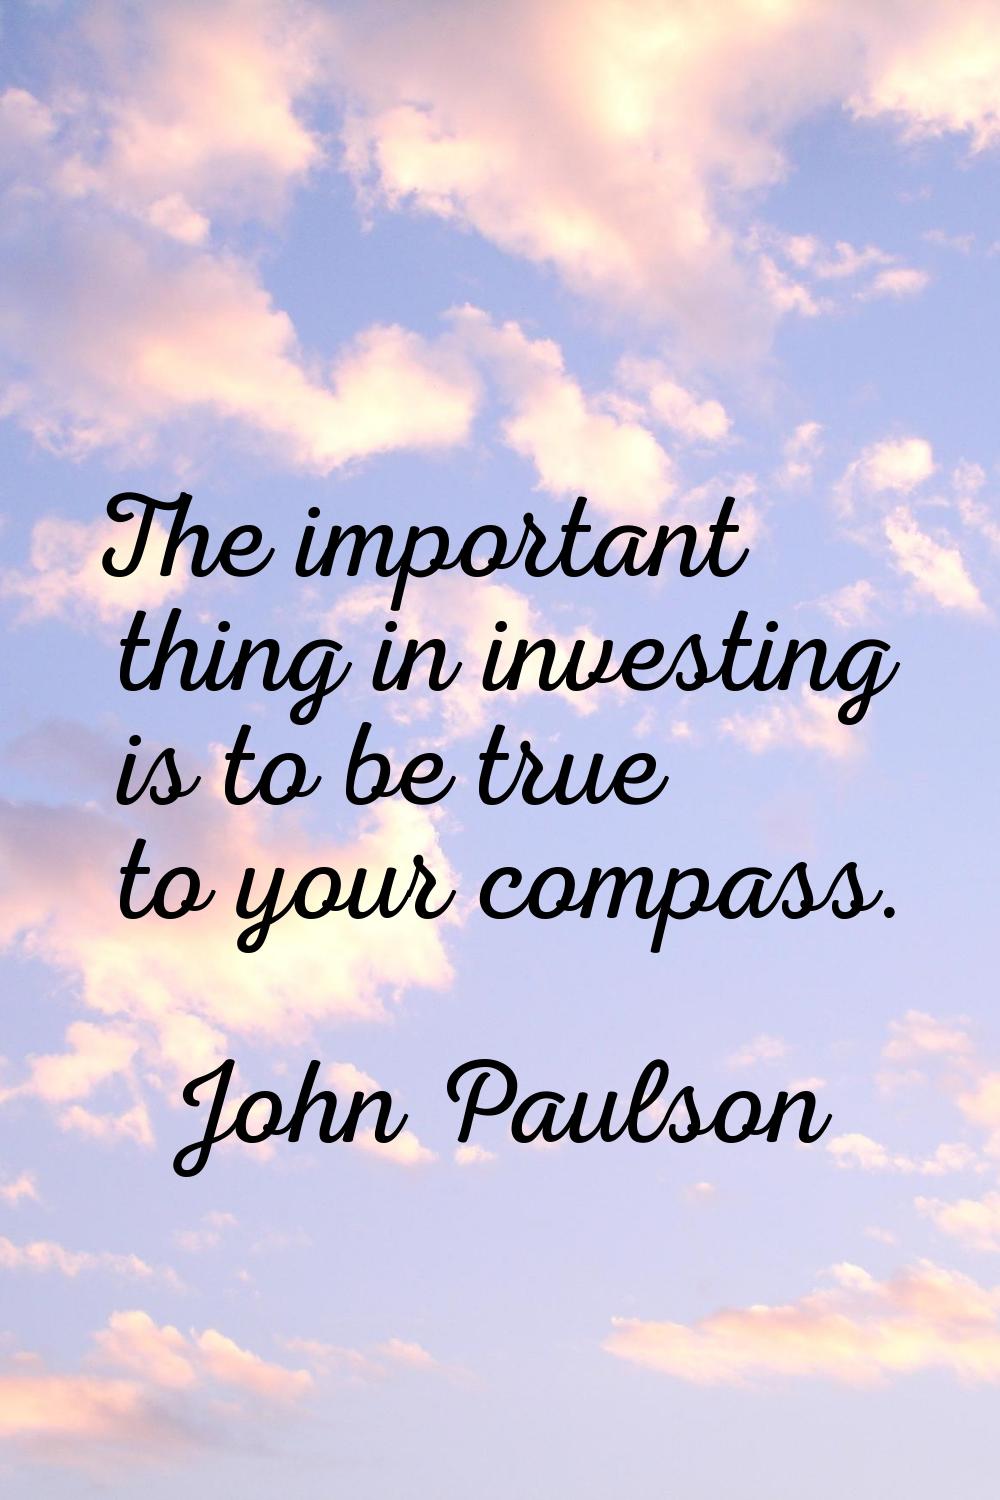 The important thing in investing is to be true to your compass.